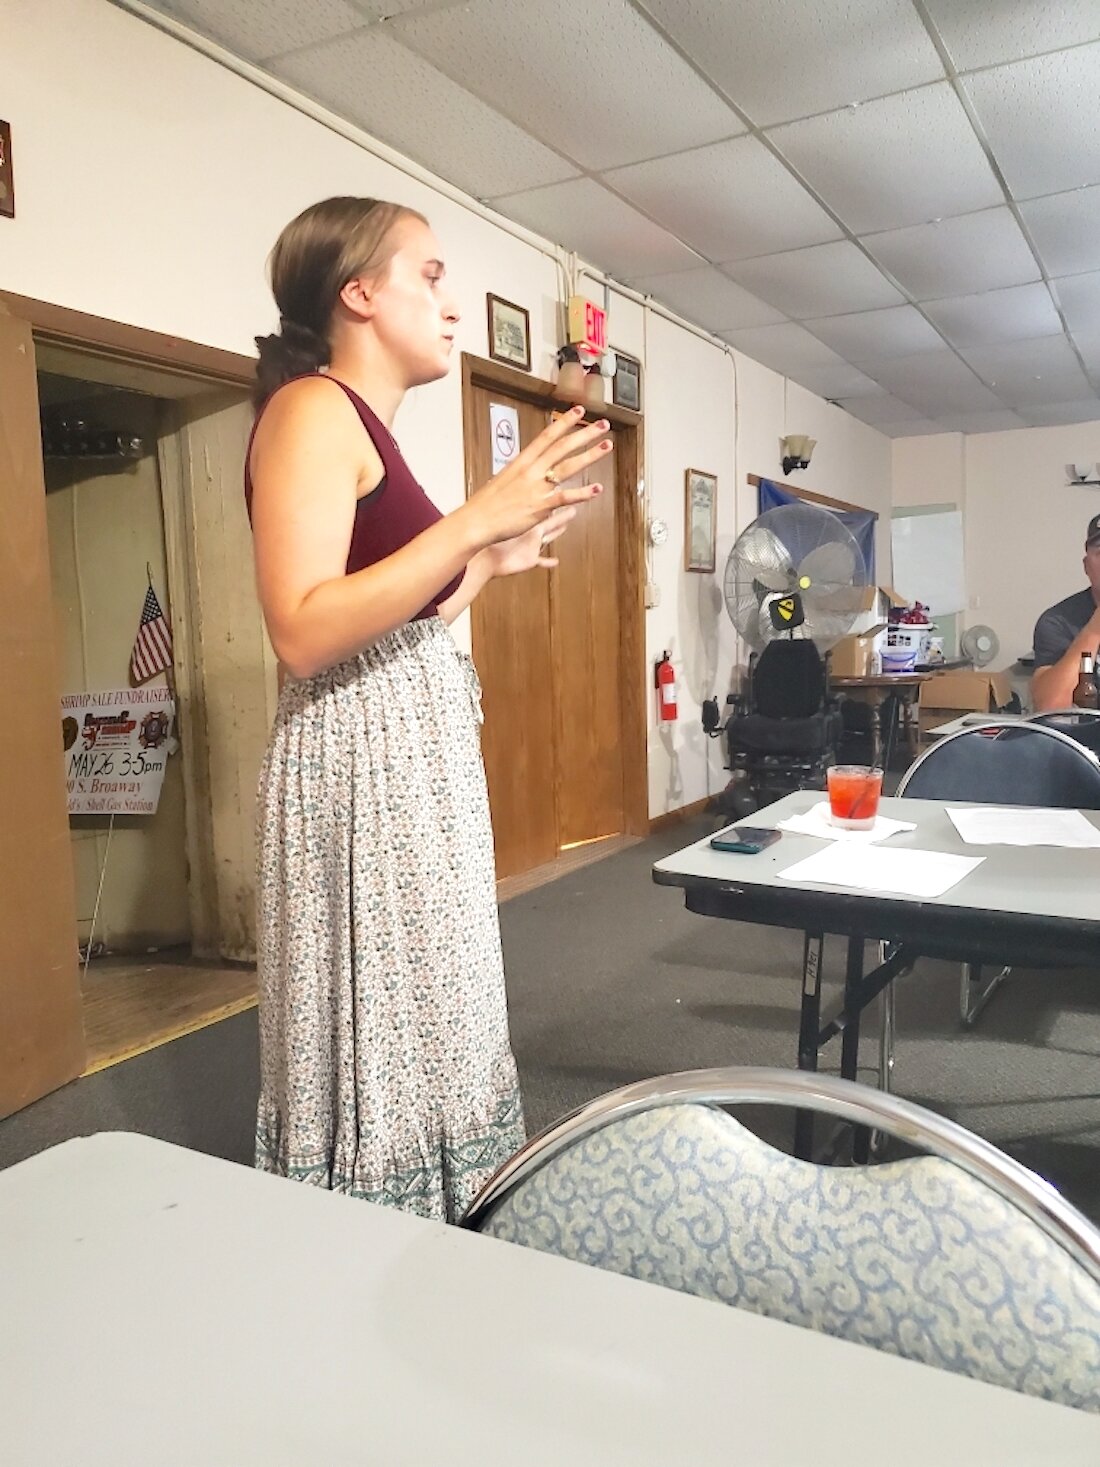 Middle and high school Special Education teacher, Brandy Pecha has volunteered to take on the responsibility of coaching the recently implemented National Archery in the School Program for the Stanley-Boyd School District.   Pecha recently addressed the Stanley Sportsman's Club about startup plans and support for the new program.